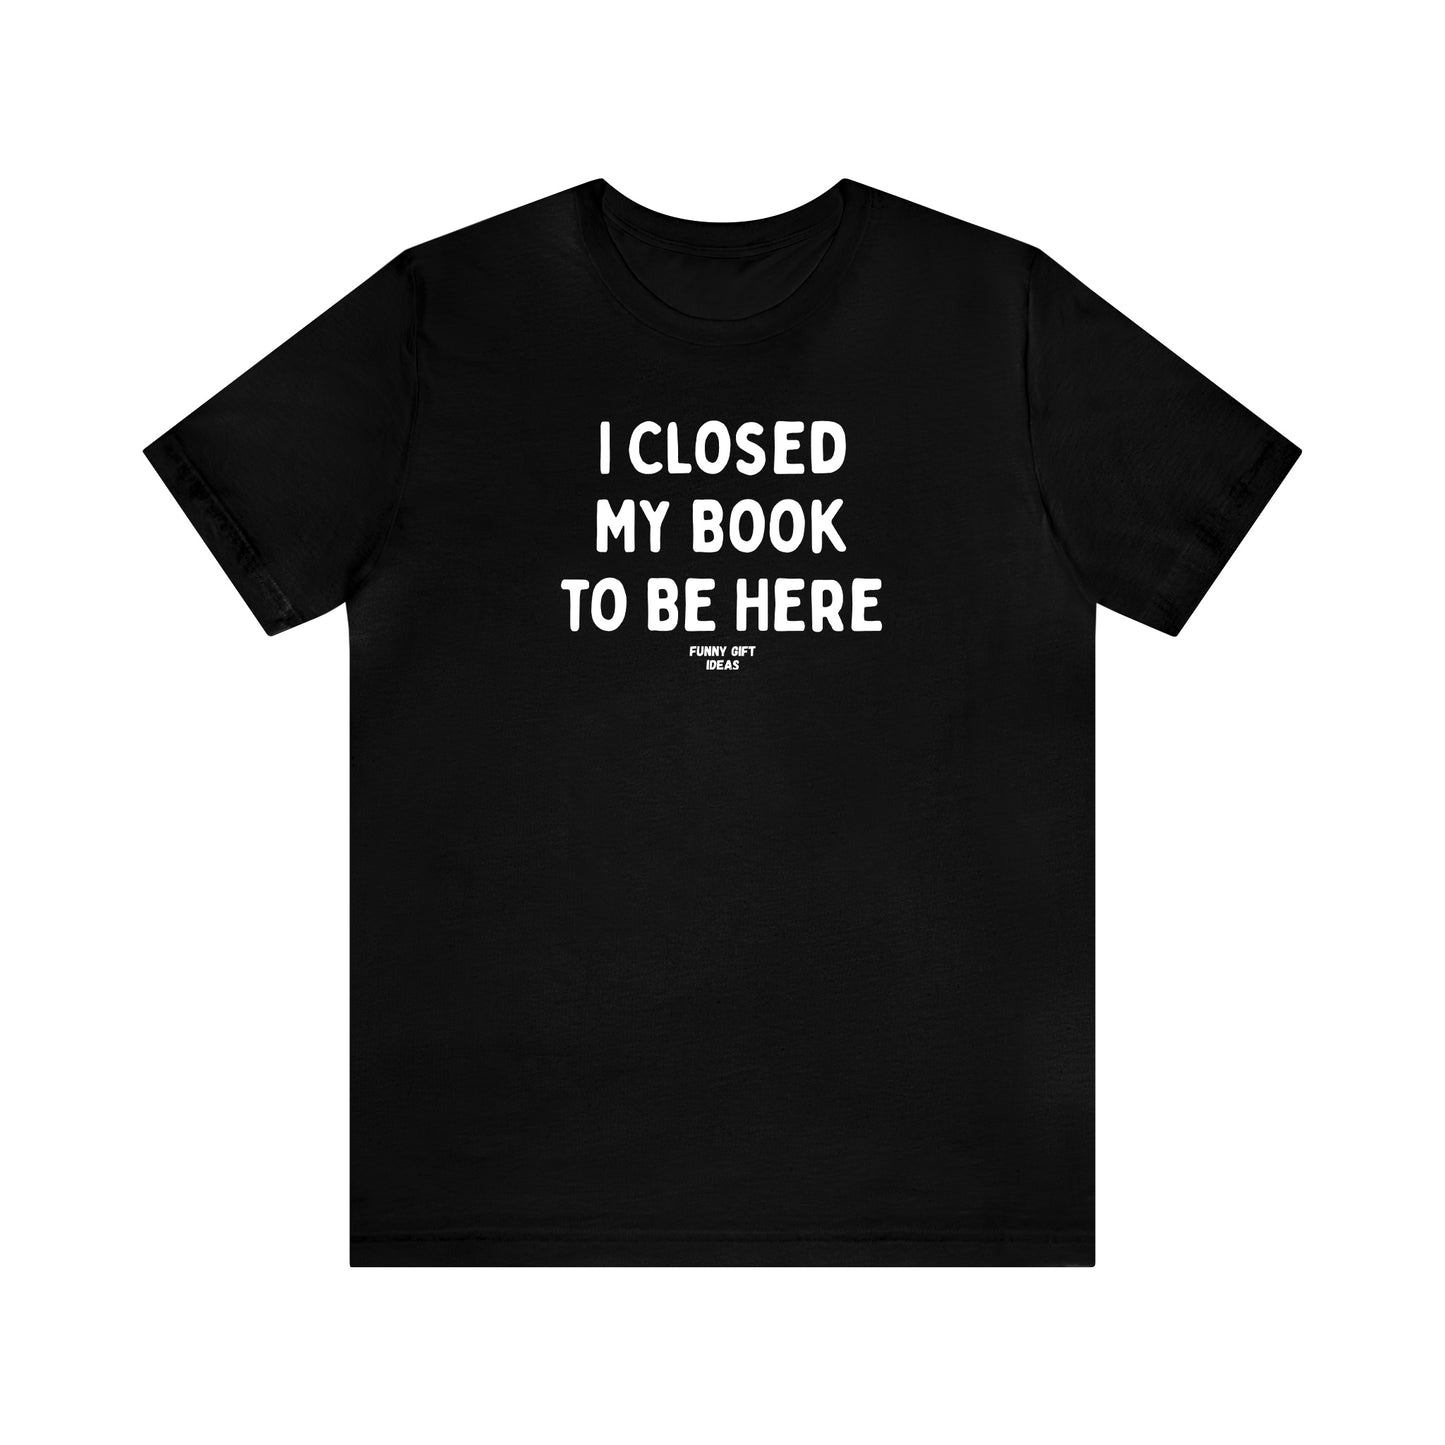 Funny Shirts for Women - I Closed My Book to Be Here - Women's T Shirts